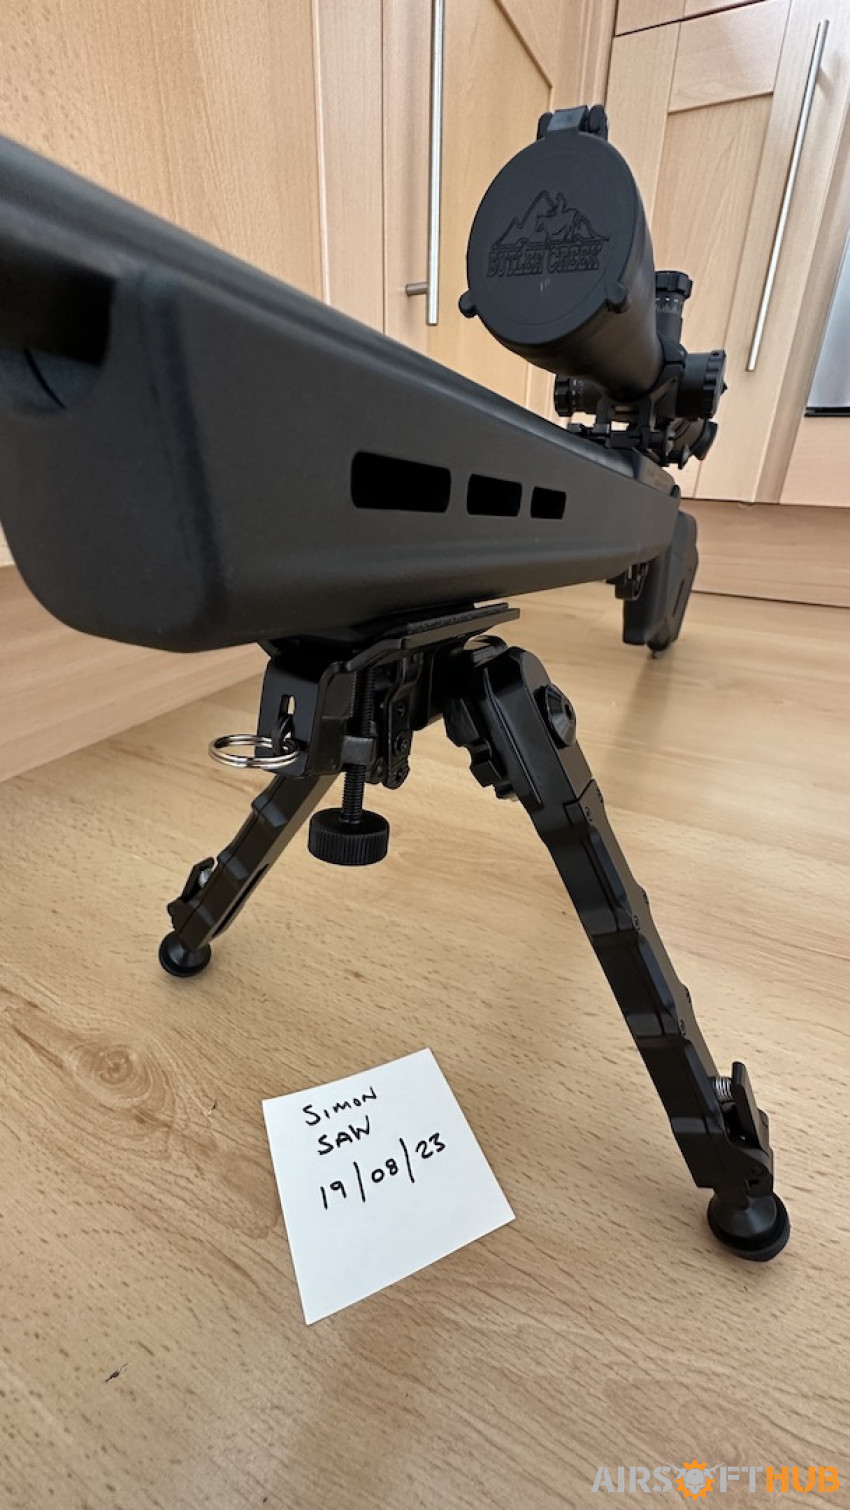 Sniper Bipod - Used airsoft equipment